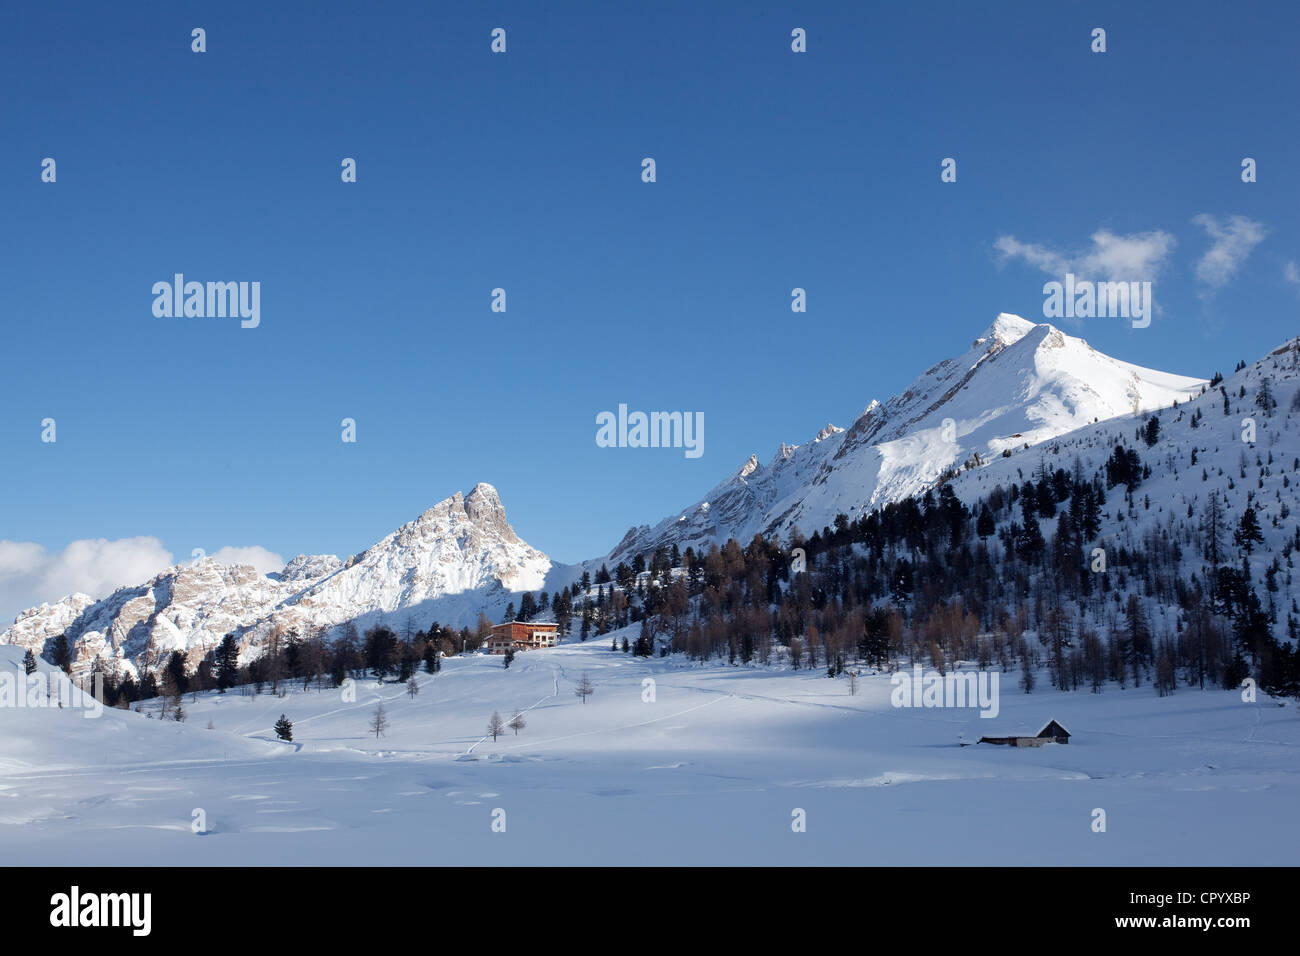 Fanesalm alp with Fanes hut in winter, Dolomites, South Tyrol, Italy, Europe Stock Photo